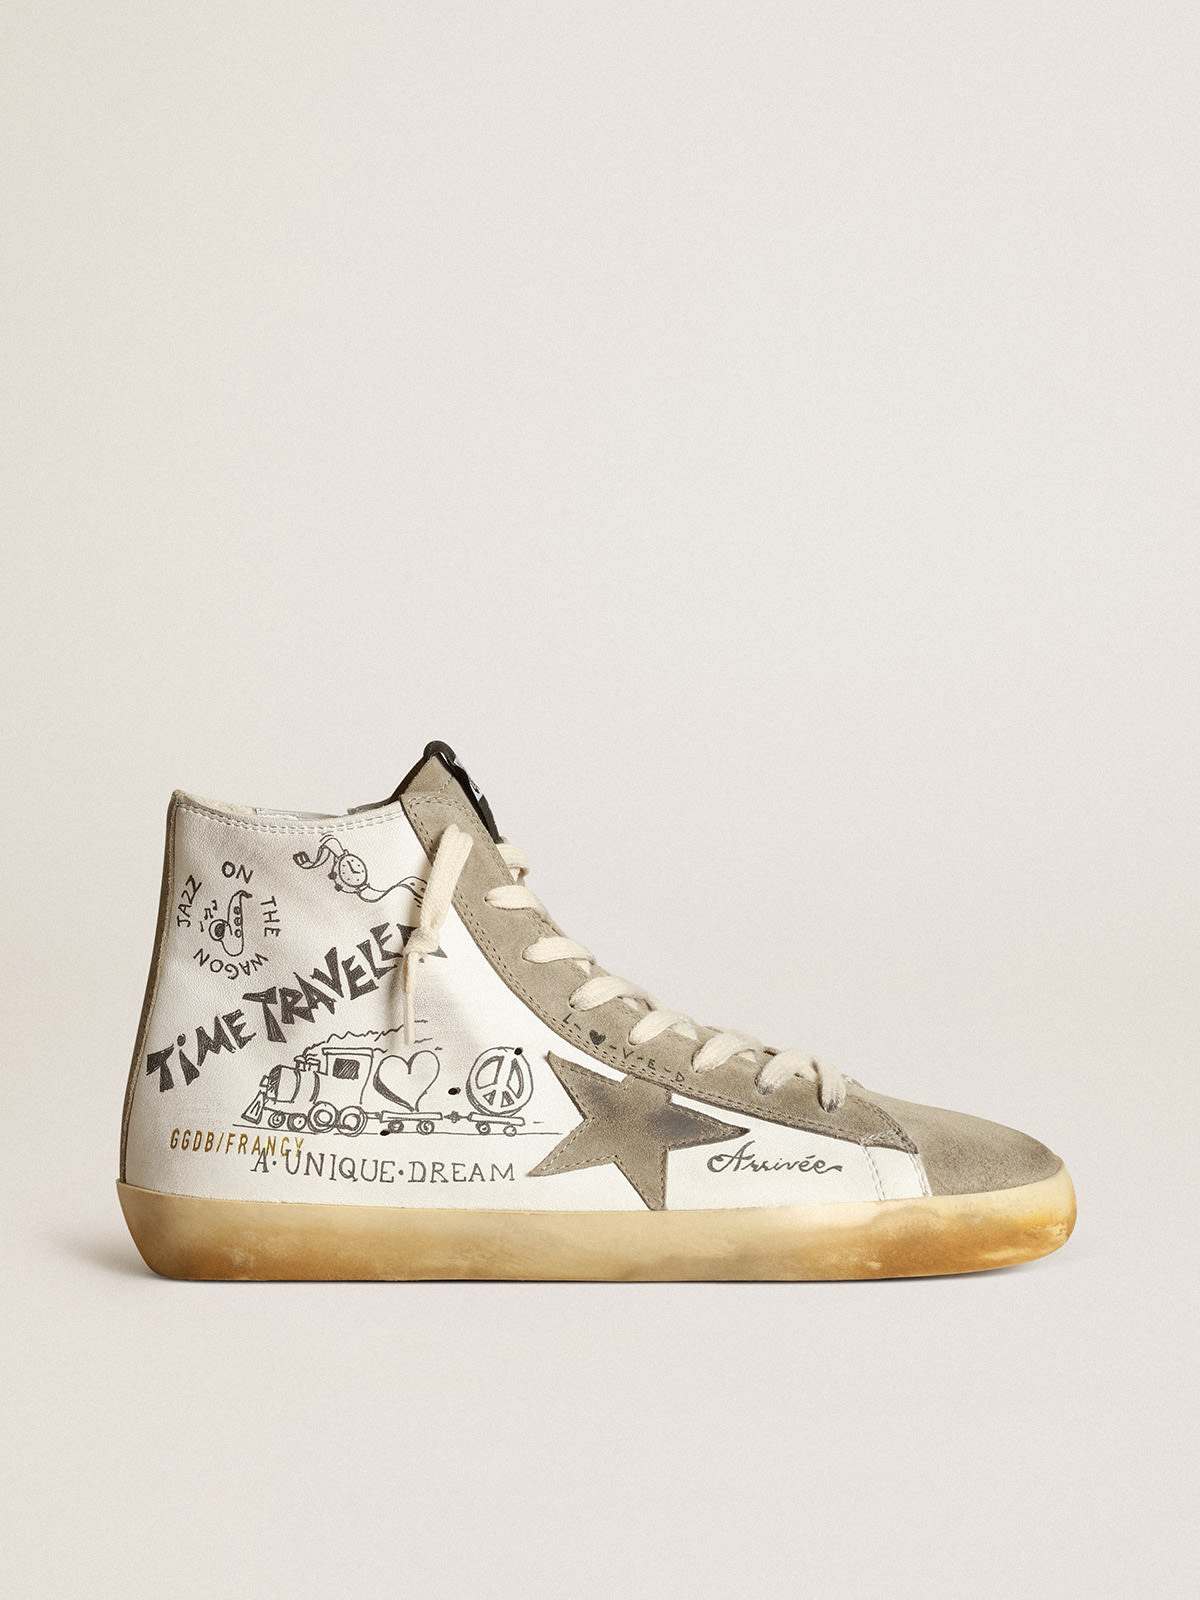 Golden Goose - Men's Francy with dove gray suede inserts and lettering in 